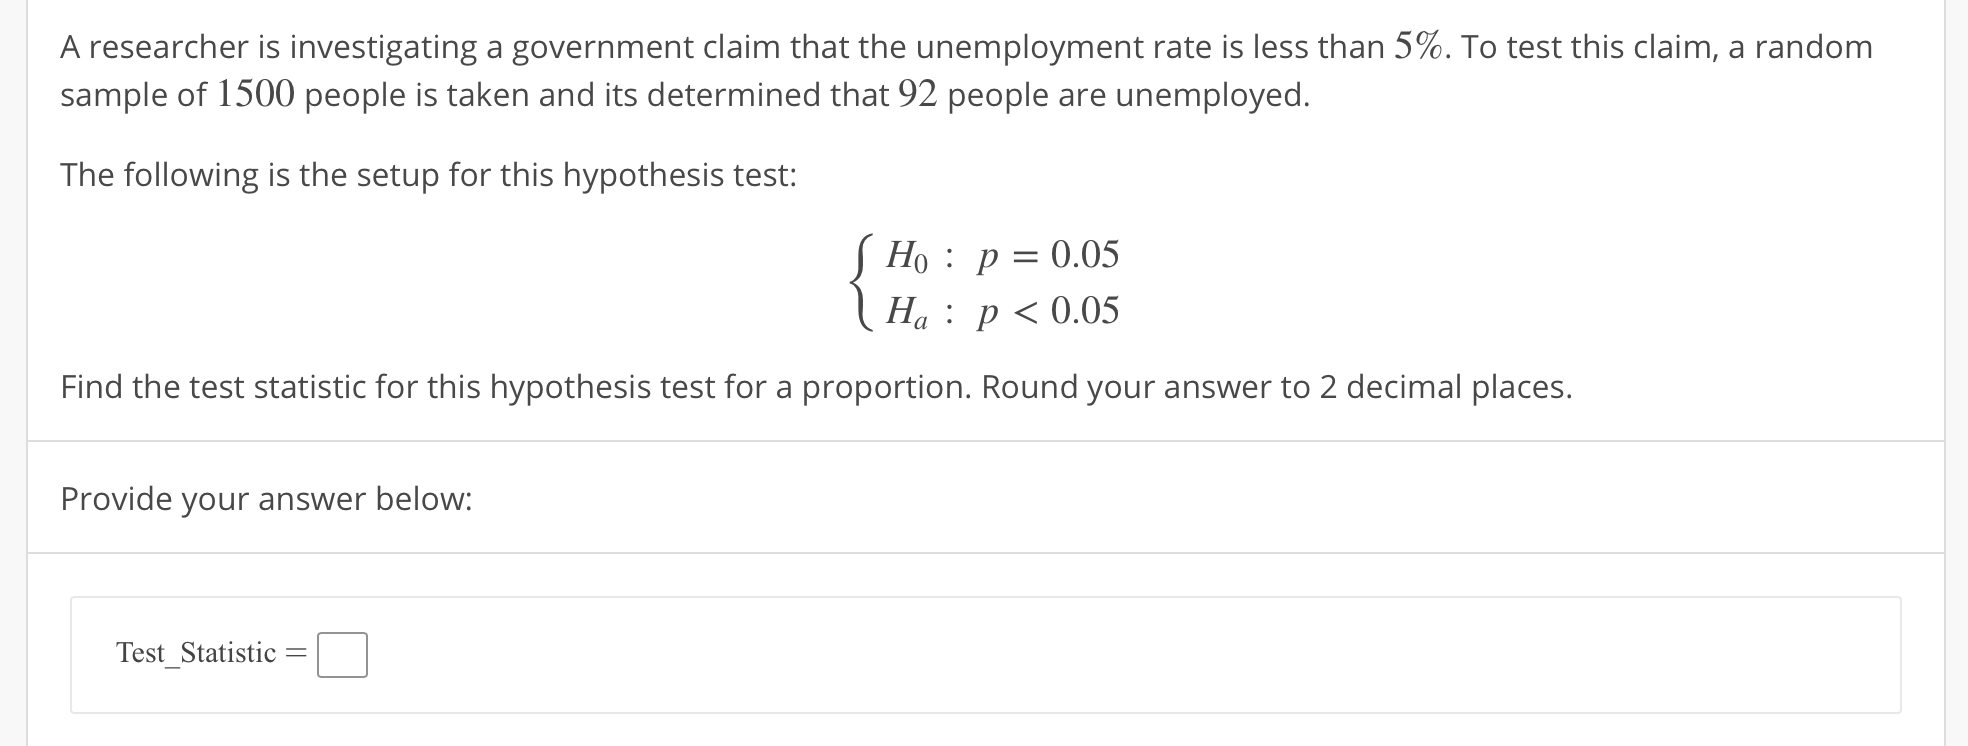 A researcher is investigating a government claim that the unemployment rate is less than 5%. To test this claim, a random
sample of 1500 people is taken and its determined that 92 people are unemployed.
The following is the setup for this hypothesis test:
Ho: p-0.05
Ha: p<0.05
Find the test statistic for this hypothesis test for a proportion. Round your answer to 2 decimal places.
Provide your answer below:
Test Statistic
